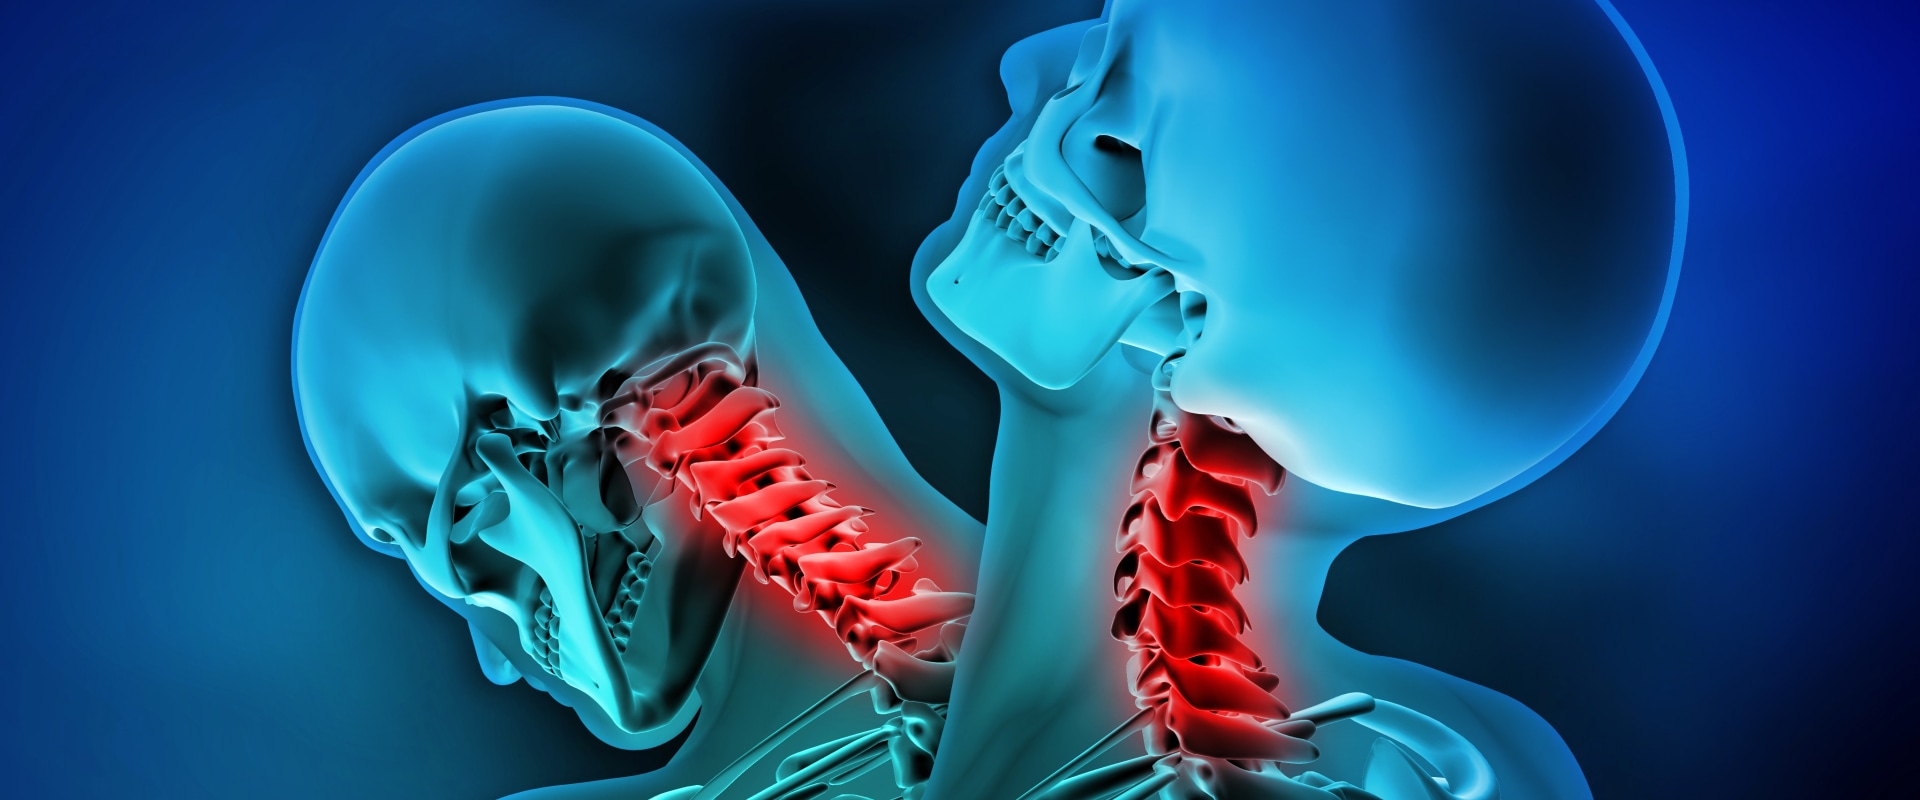 Chiropractic Care for Whiplash Injury: An Expert's Perspective